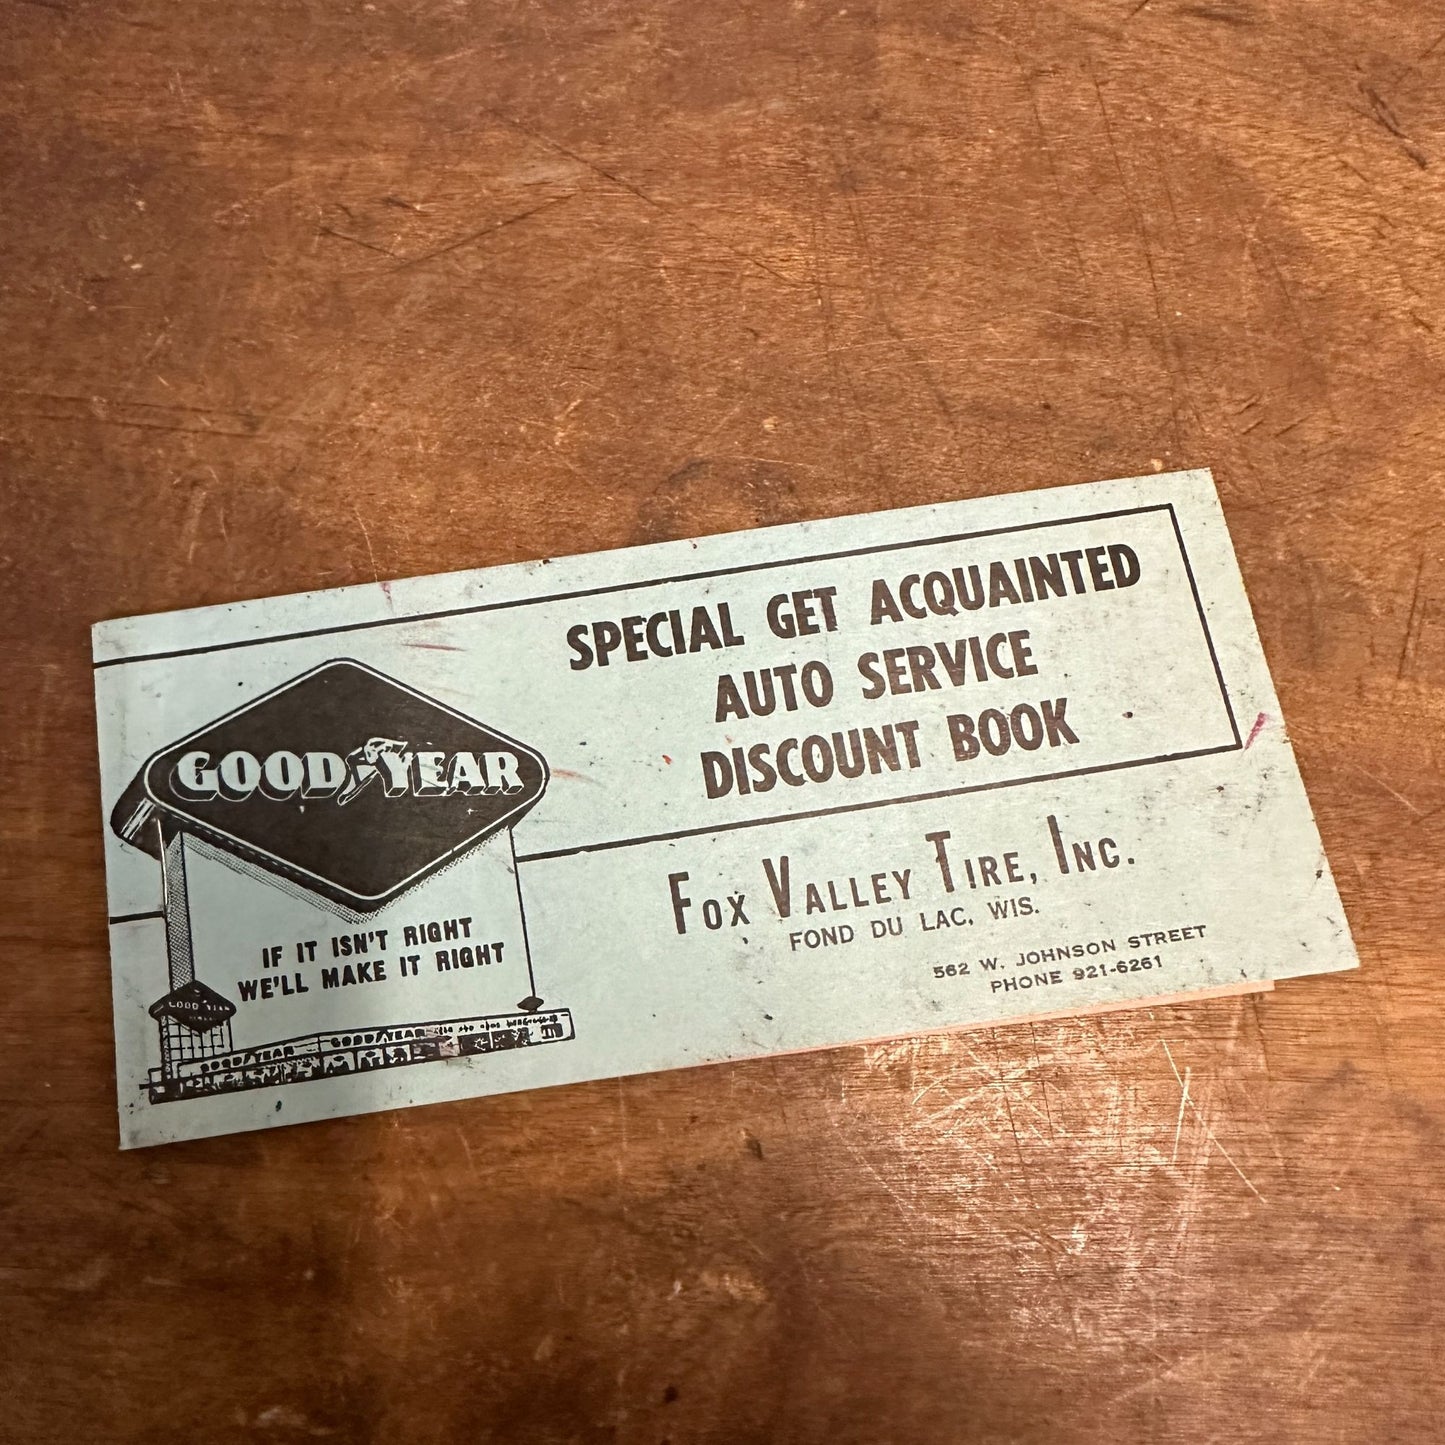 Vintage 1950s Goodyear Tires - Fox Valley Tires Inc Fond du Lac Wis Coupon Book